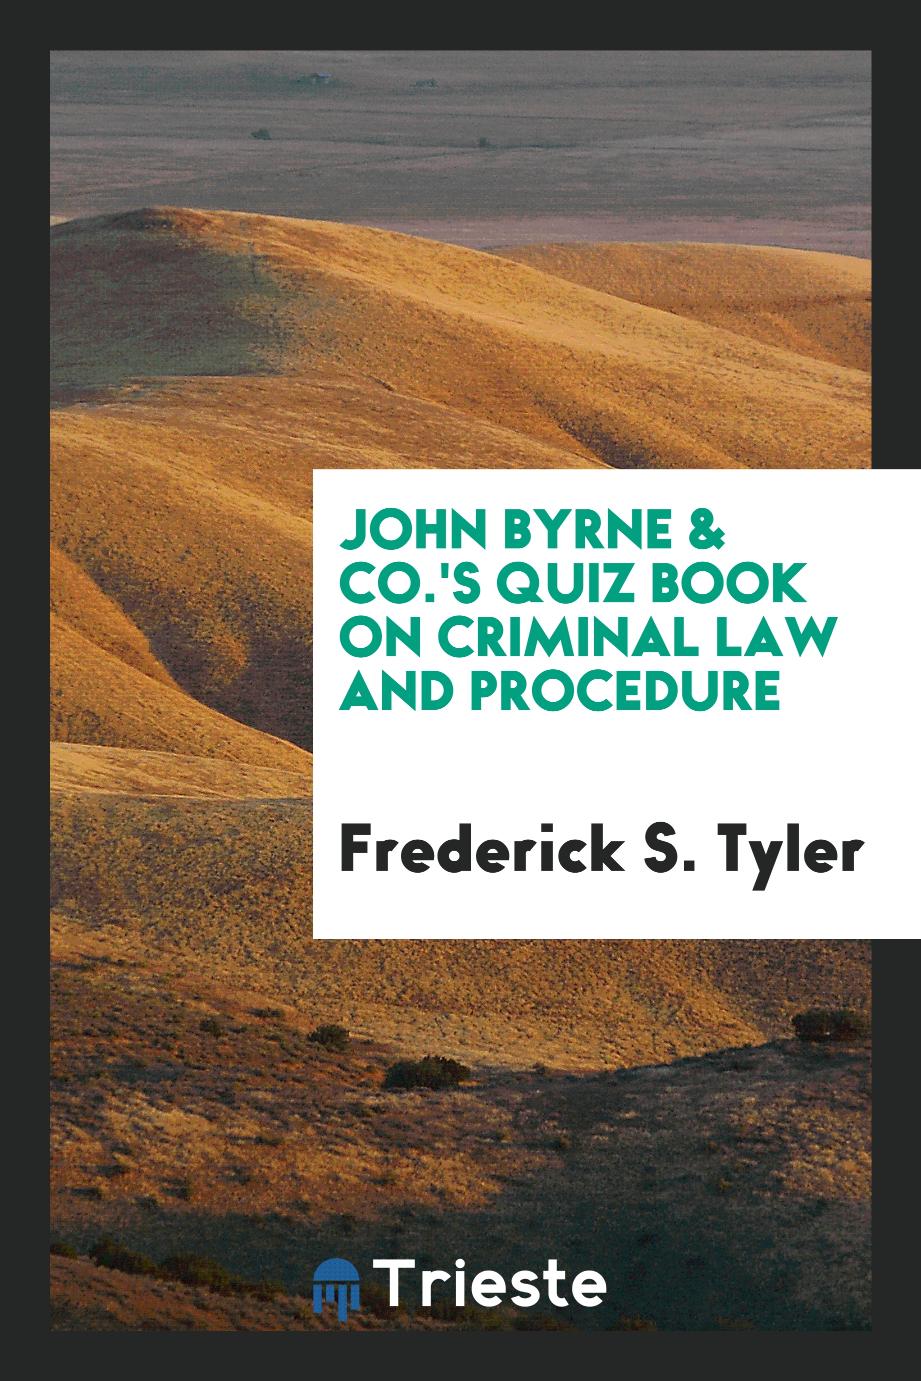 John Byrne & Co.'s Quiz Book on Criminal Law and Procedure